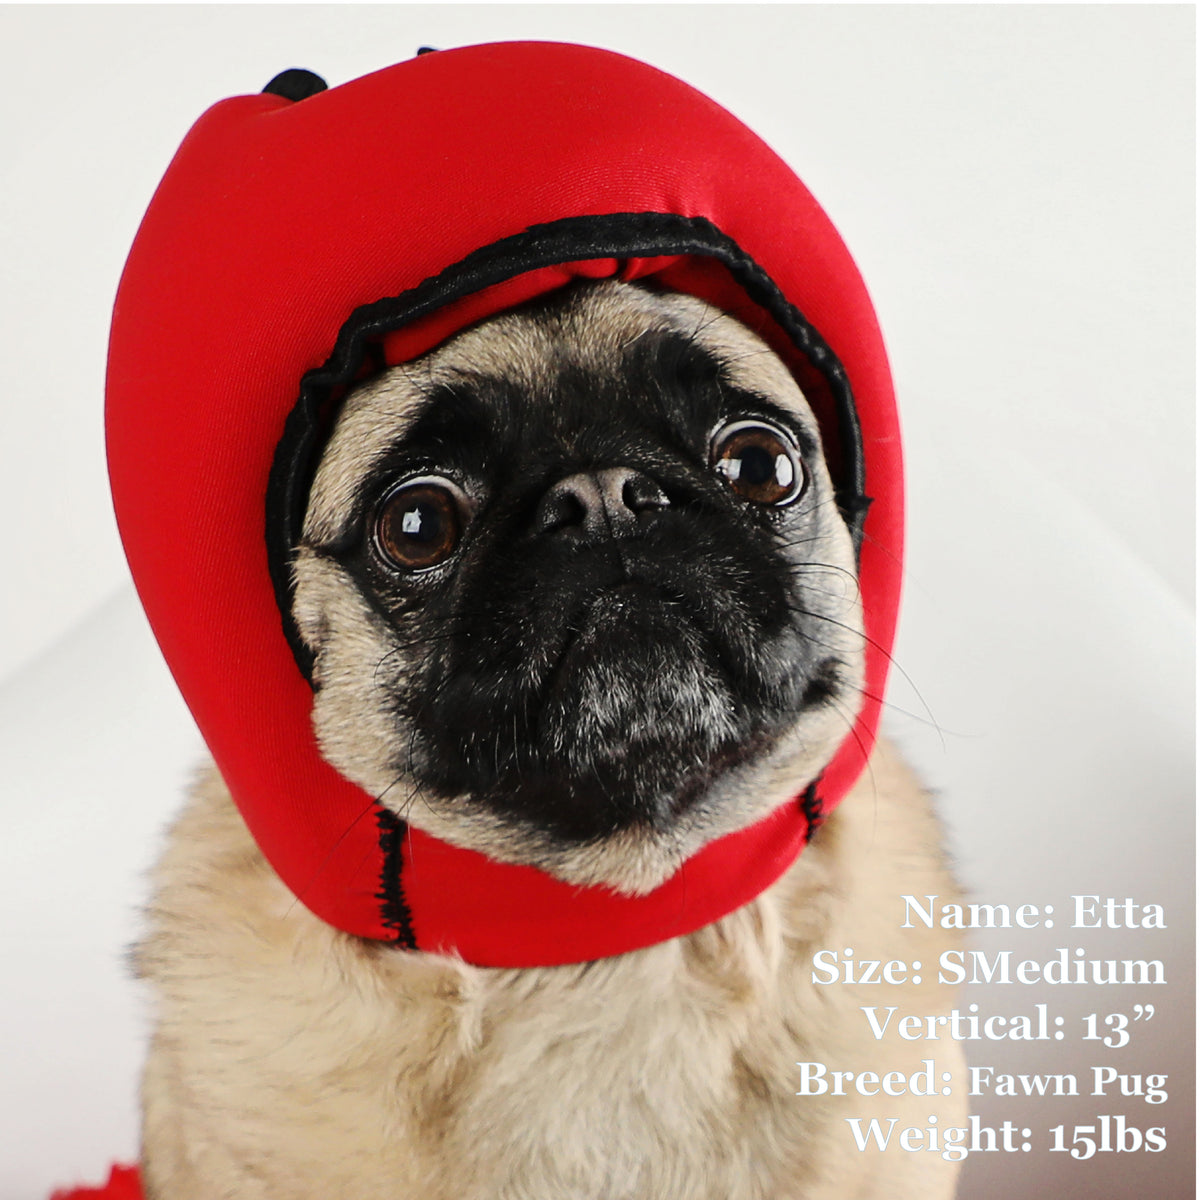 Etta is a Pug in a SMedium Red PAWNIX Noise Cancelling Headset for dogs